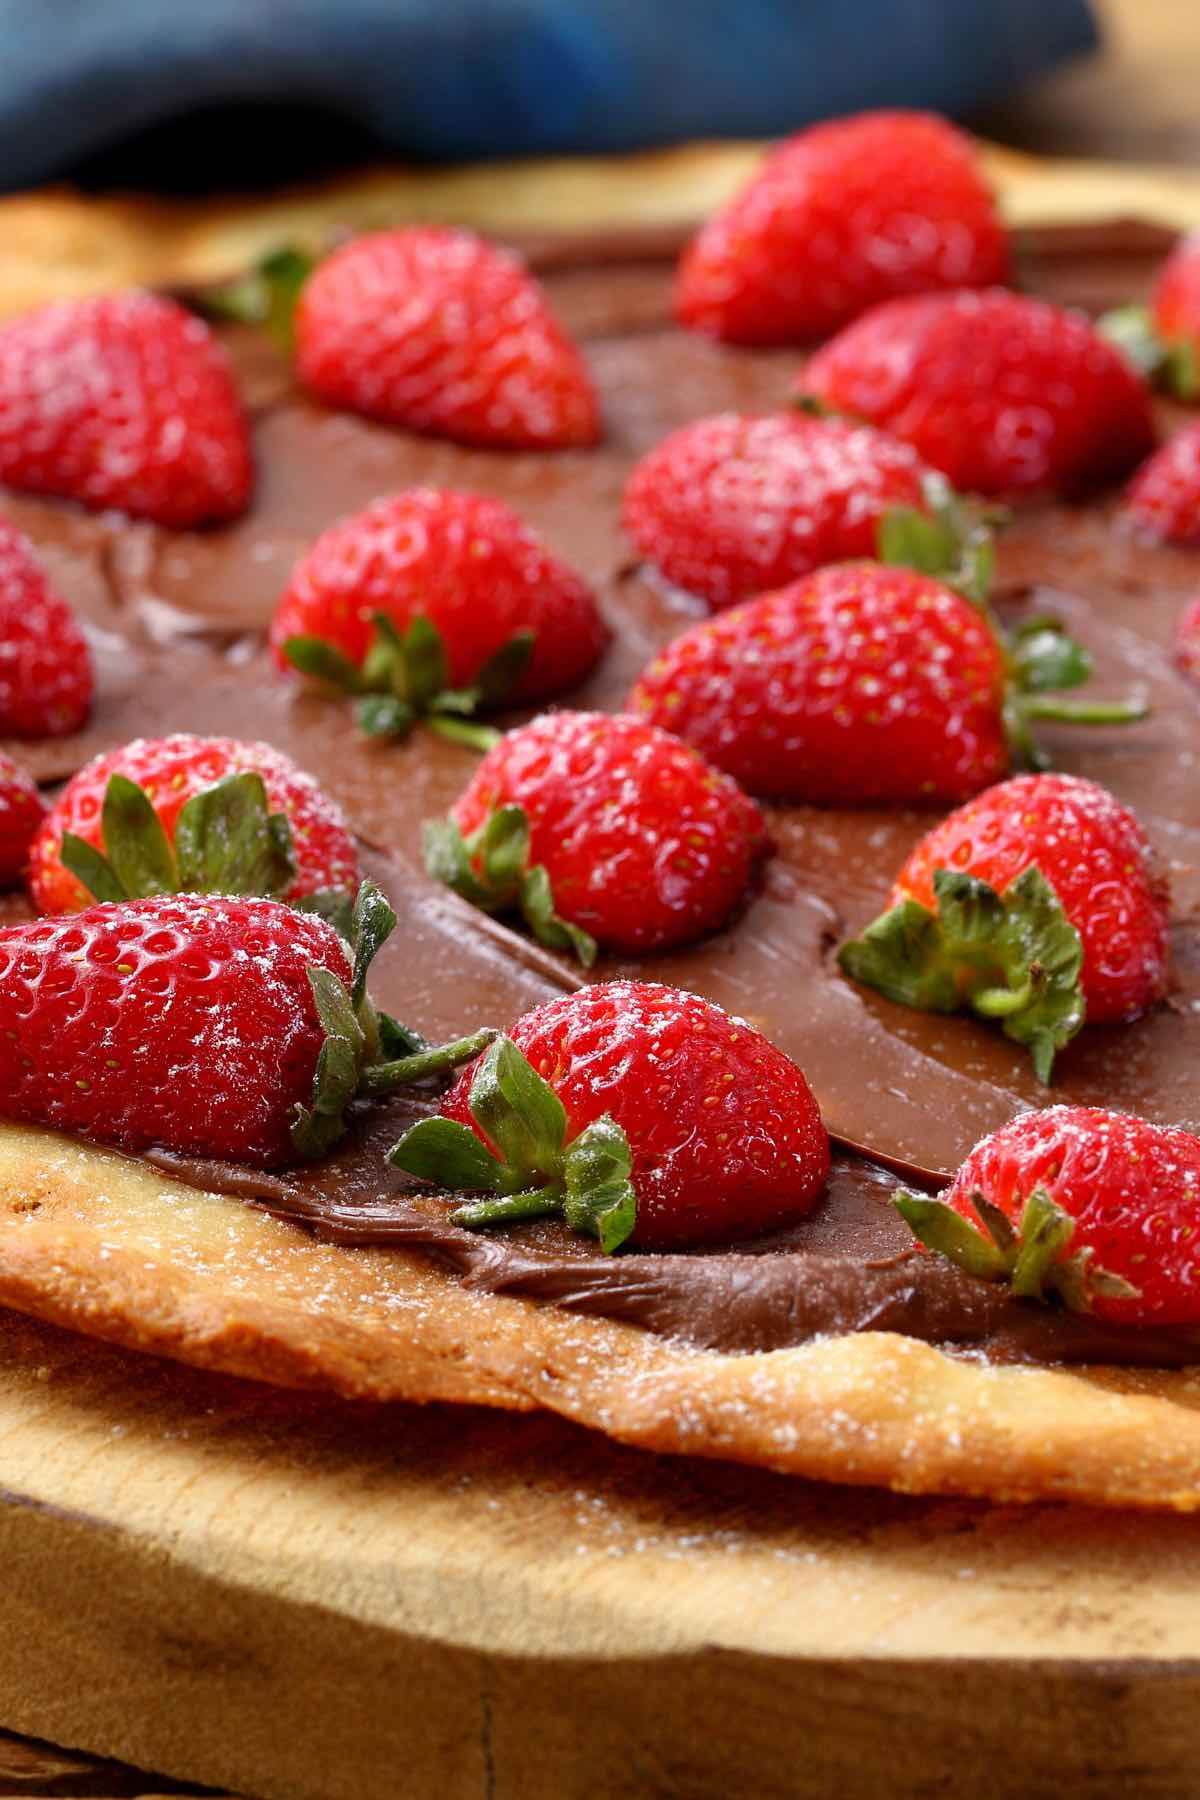 This Nutella Pizza is a must-try dessert that’s sure to impress your guest. It’s perfectly easy to make – this recipe skips out on the tomato and cheese in favor of adding chocolate spread onto the pizza crust, making a mouth-watering dessert. You can easily customize it with different topping ideas like strawberries, bananas, or marshmallows.  